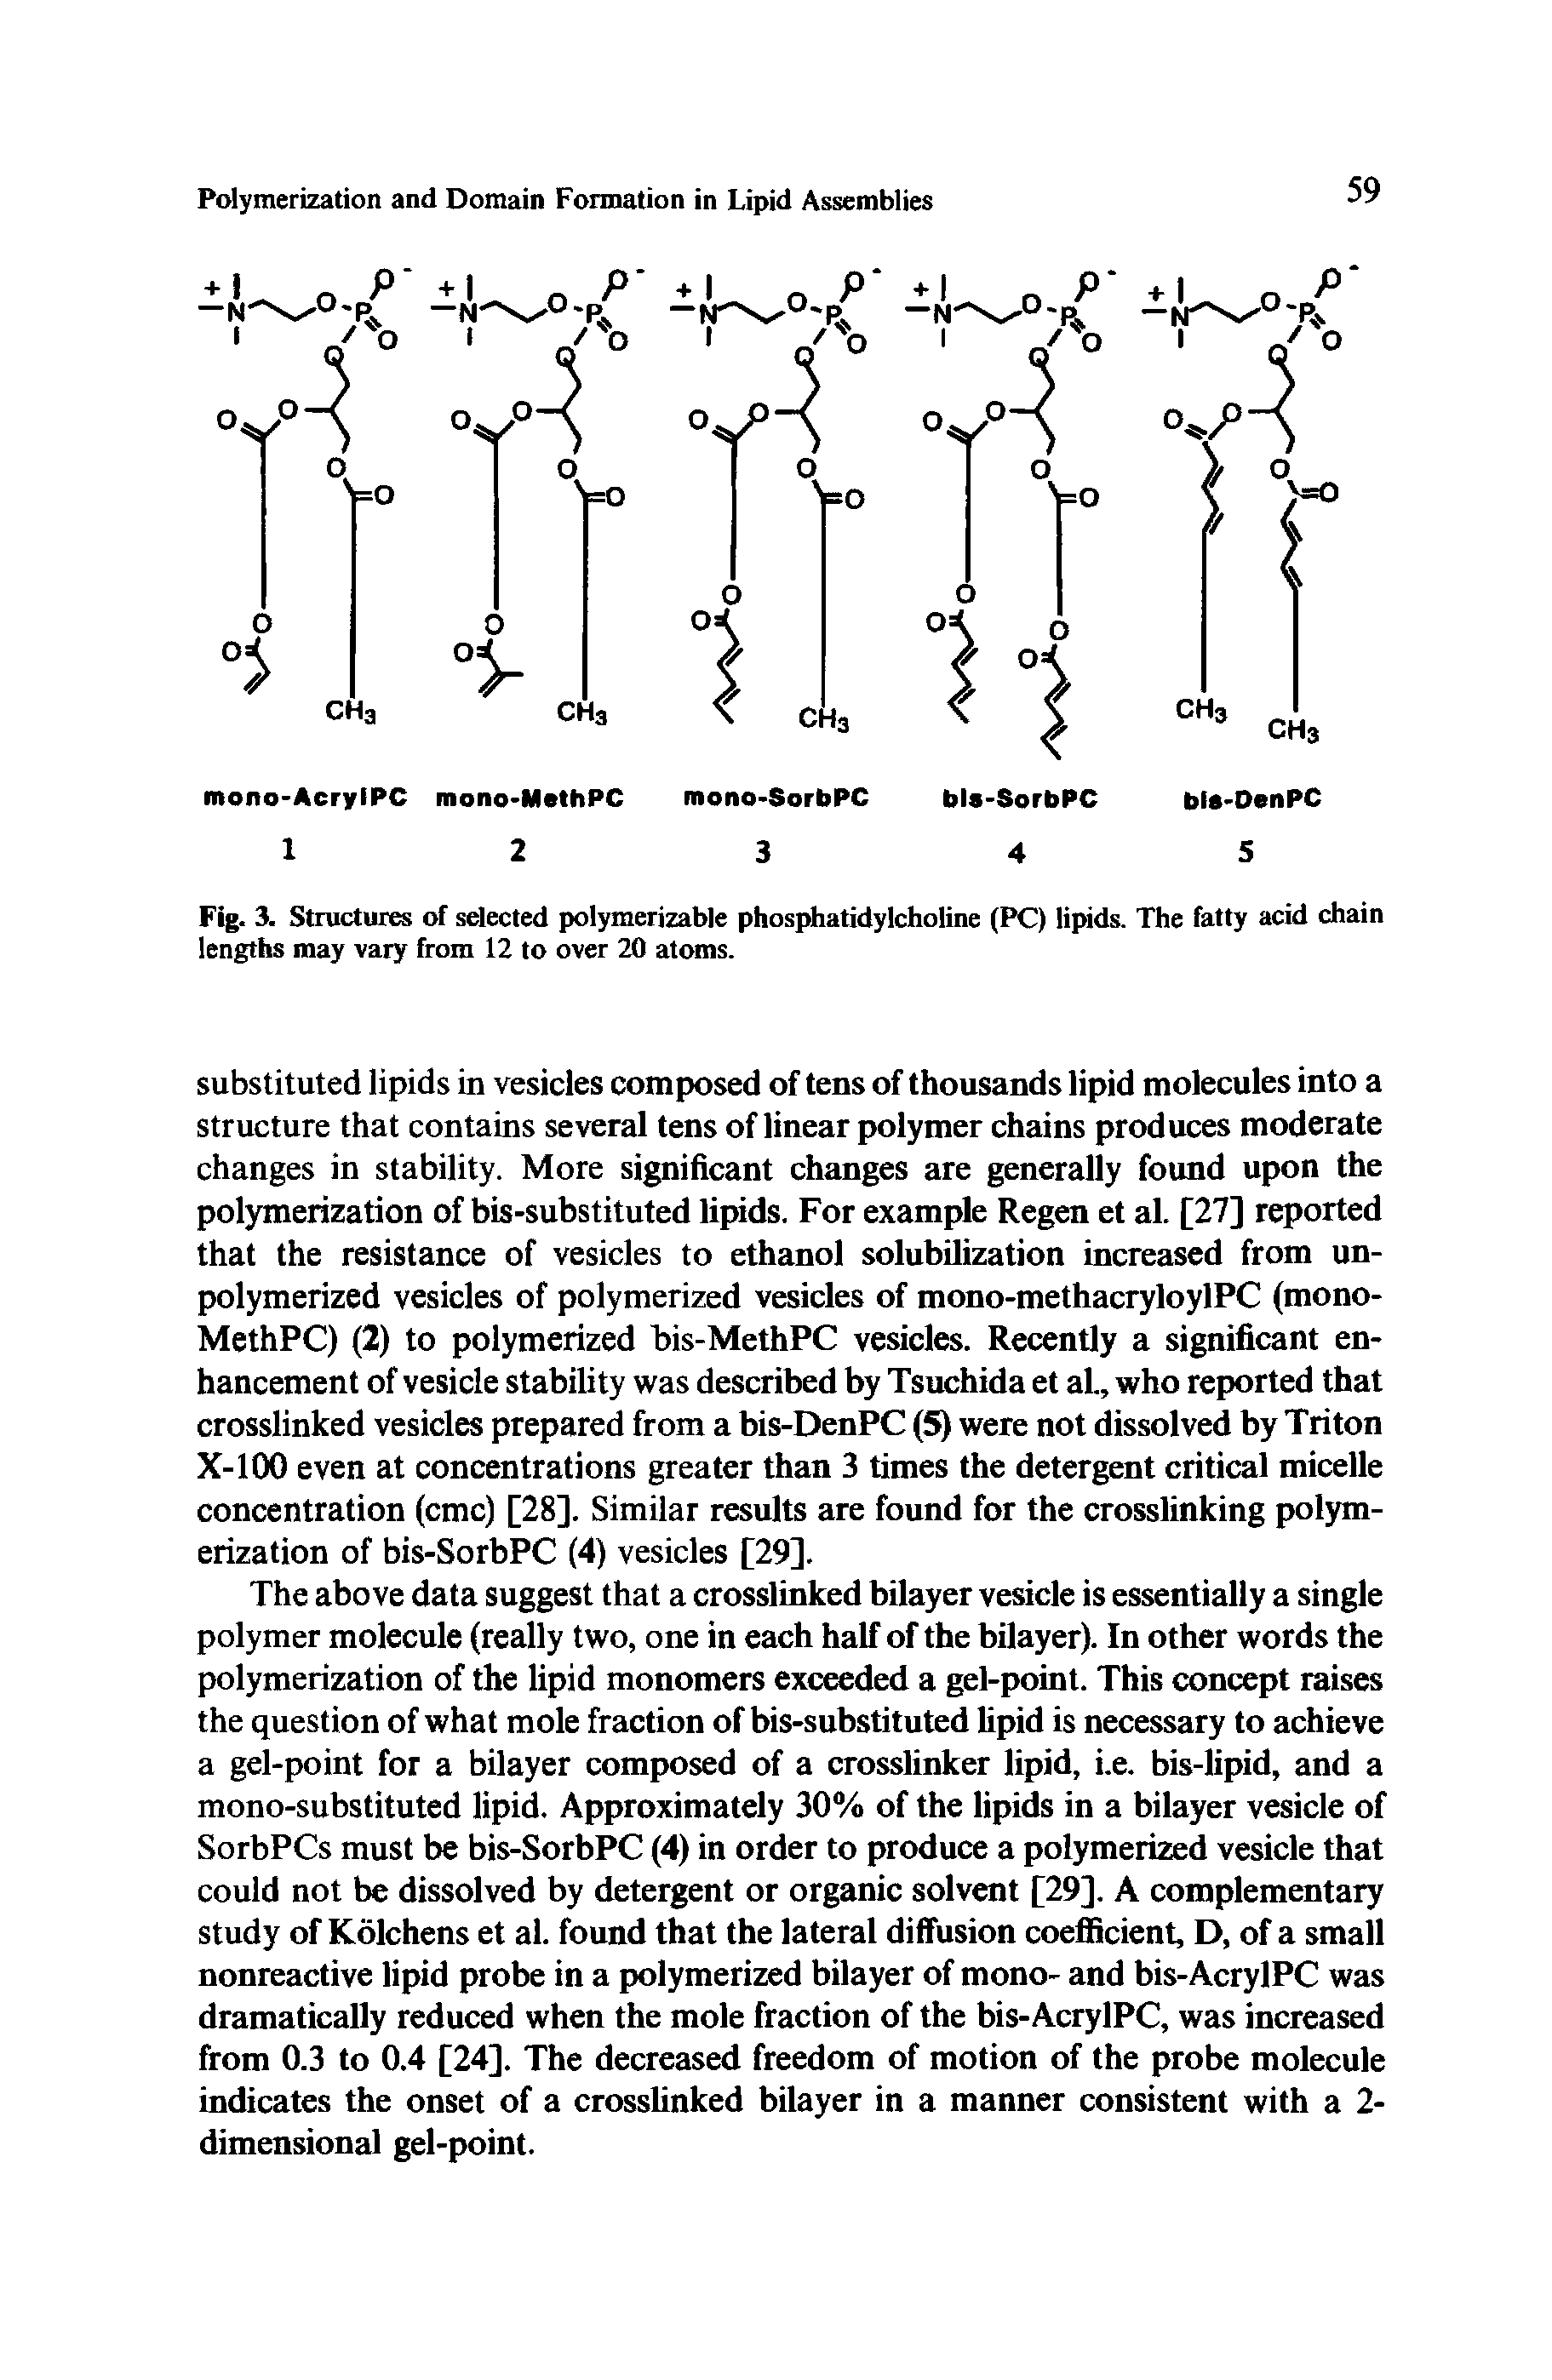 Fig. 3. Structures of selected polymerizable phosphatidylcholine (PC) lipids. The fatty acid chain lengths may vary from 12 to over 20 atoms.